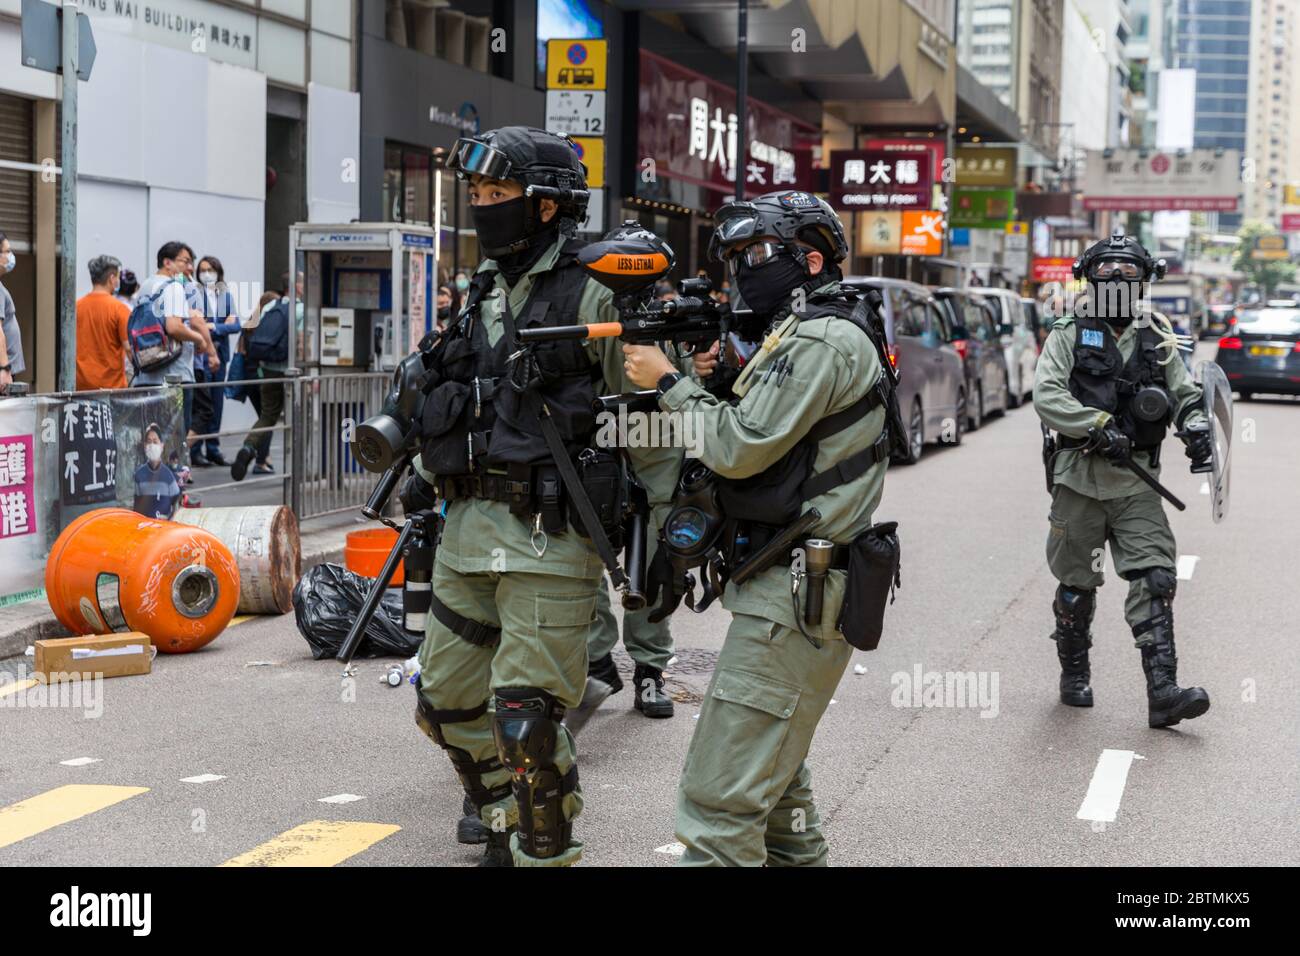 Central, Hong Kong. 27 May, 2020 Hong Kong Protest Anti-National Anthem Law. Police officer preparing to fire pepper balls into the crowd.  Credit: David Ogg / Alamy Live News Stock Photo